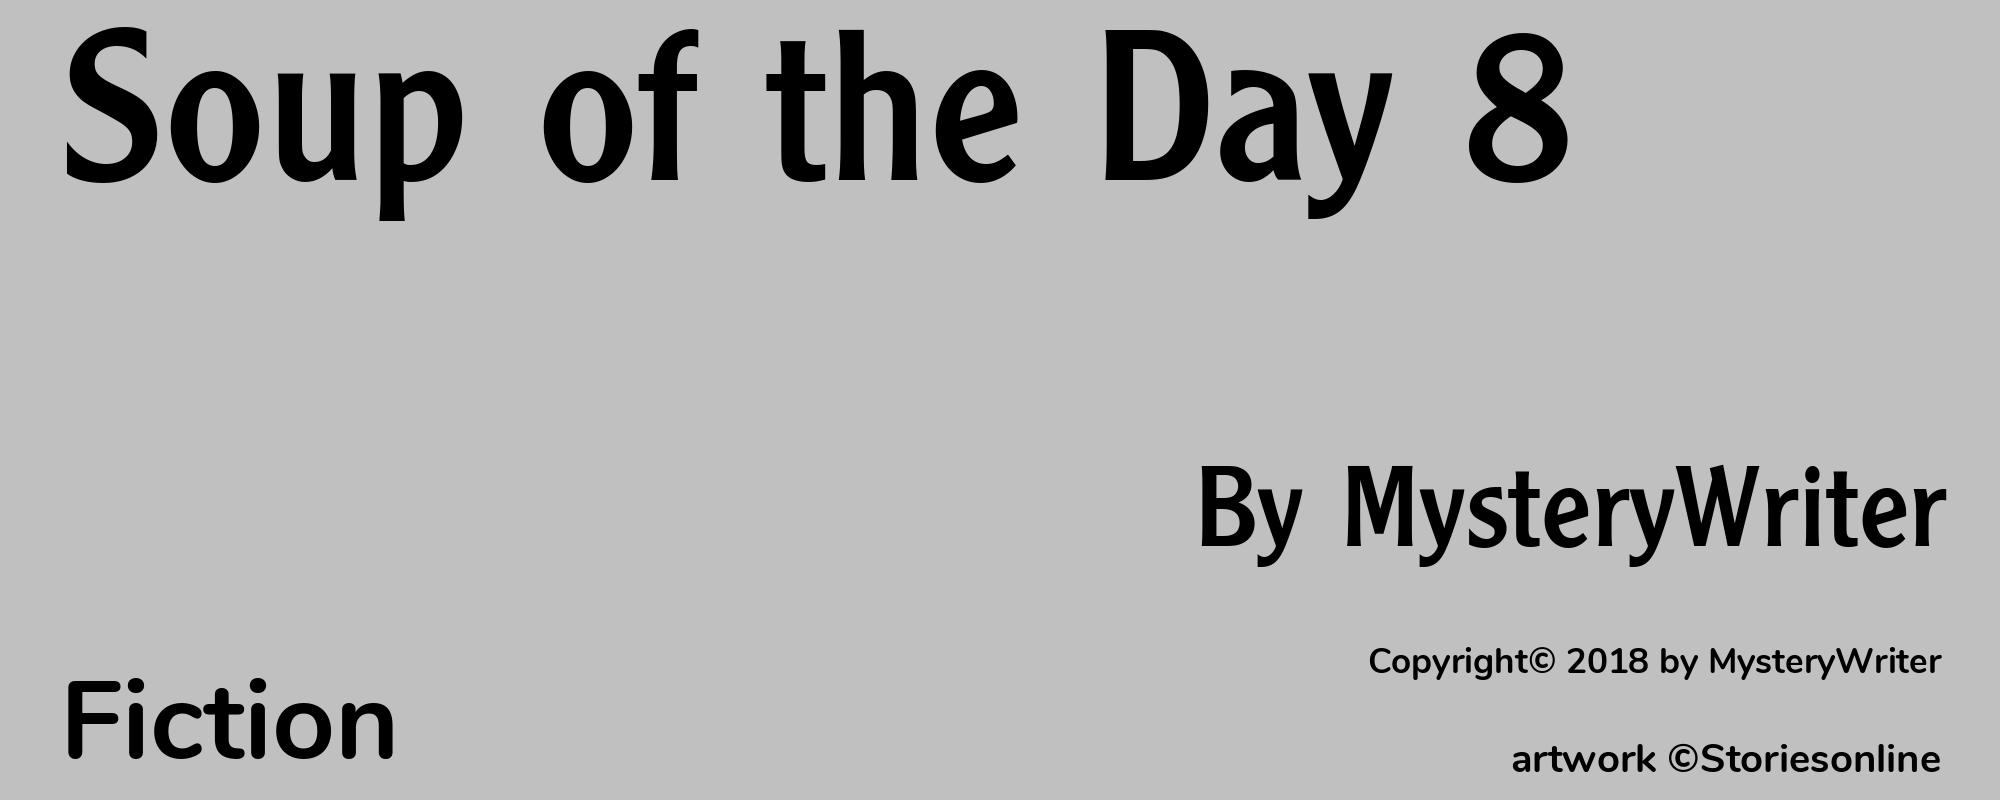 Soup of the Day 8 - Cover